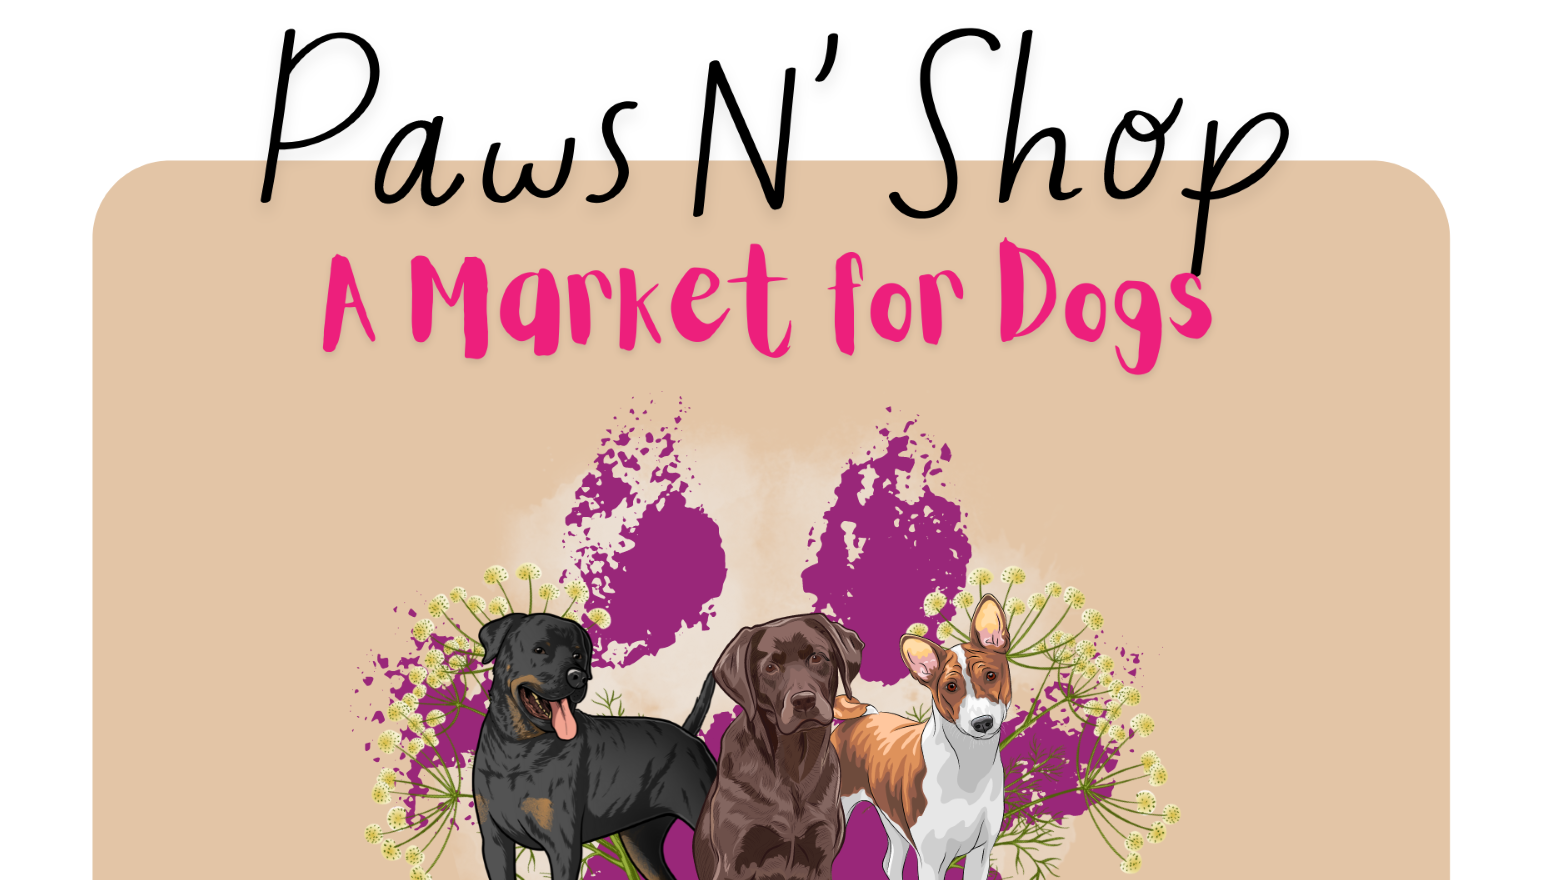 The "Paws N' Shop" promotional image is sure to catch the eyes of pet owners. It displays beautifully hand-drawn illustrations of three different dog breeds. This artistic trio is set against a backdrop richly designed with flowers, lavishing warmth and nature's touch upon the viewers. Hovering prominently above these designs are the store's boldly-stated logo and its straightforward tagline - "A Market for Pet Supplies," making it clear what all dog enthusiasts can expect from this place - everything they possibly need for their beloved pets.